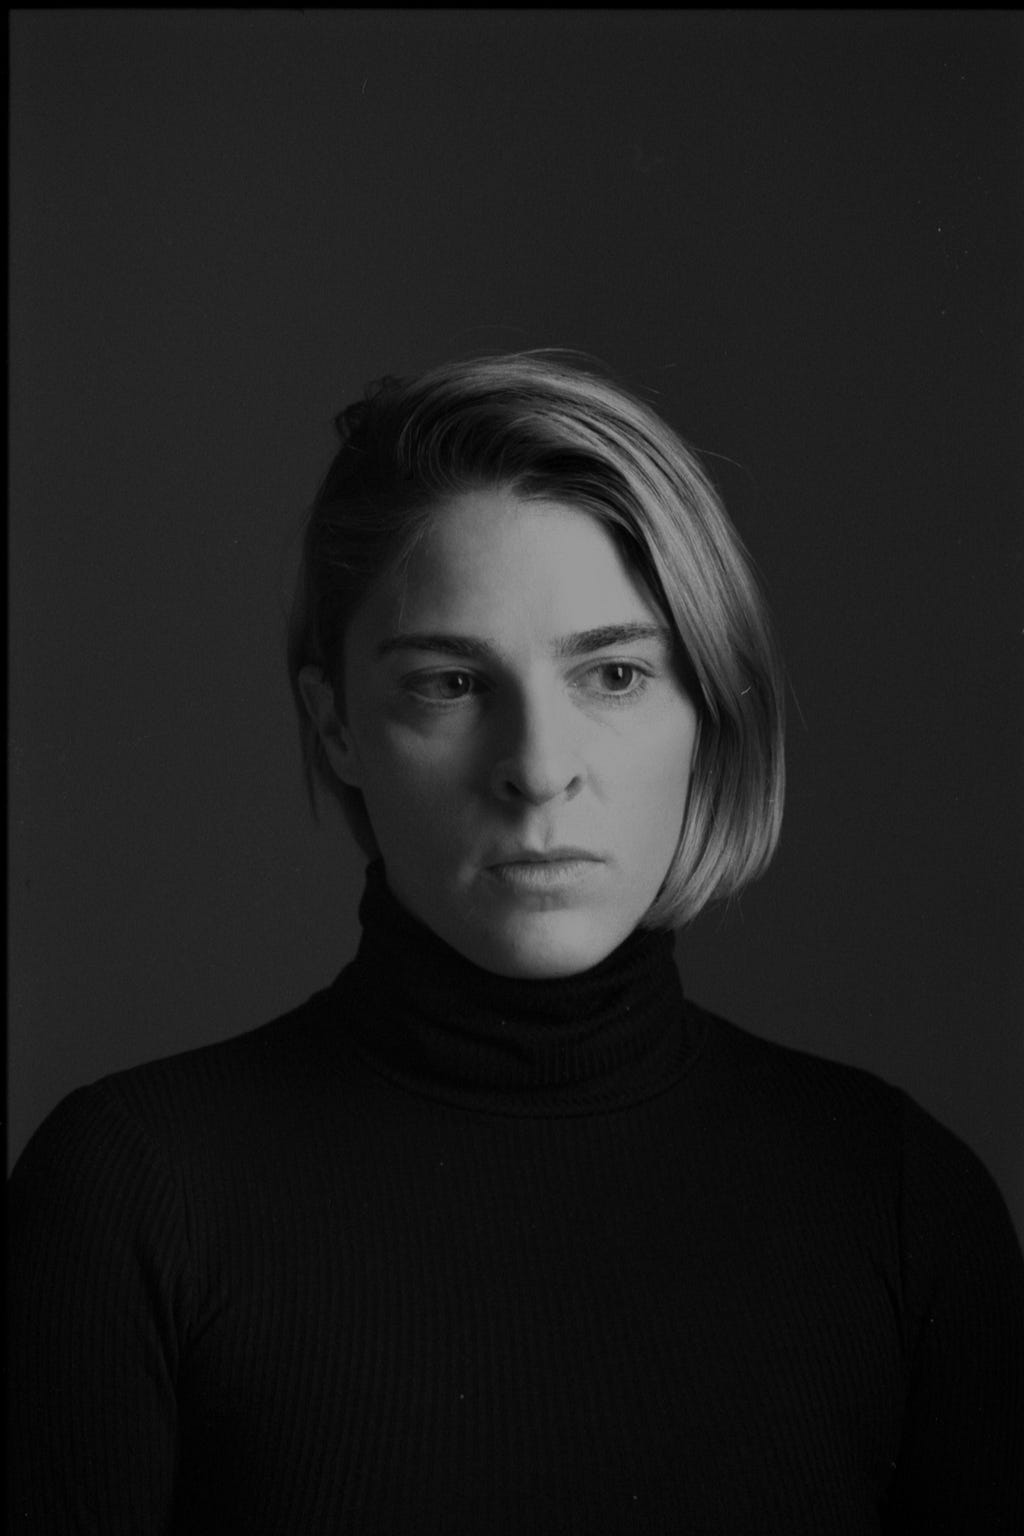 Black and white studio portrait of Alyssa she is looking off to her left. Her expression is serious. Her upper torso and head are centered in the frame. She wears a black turtleneck.